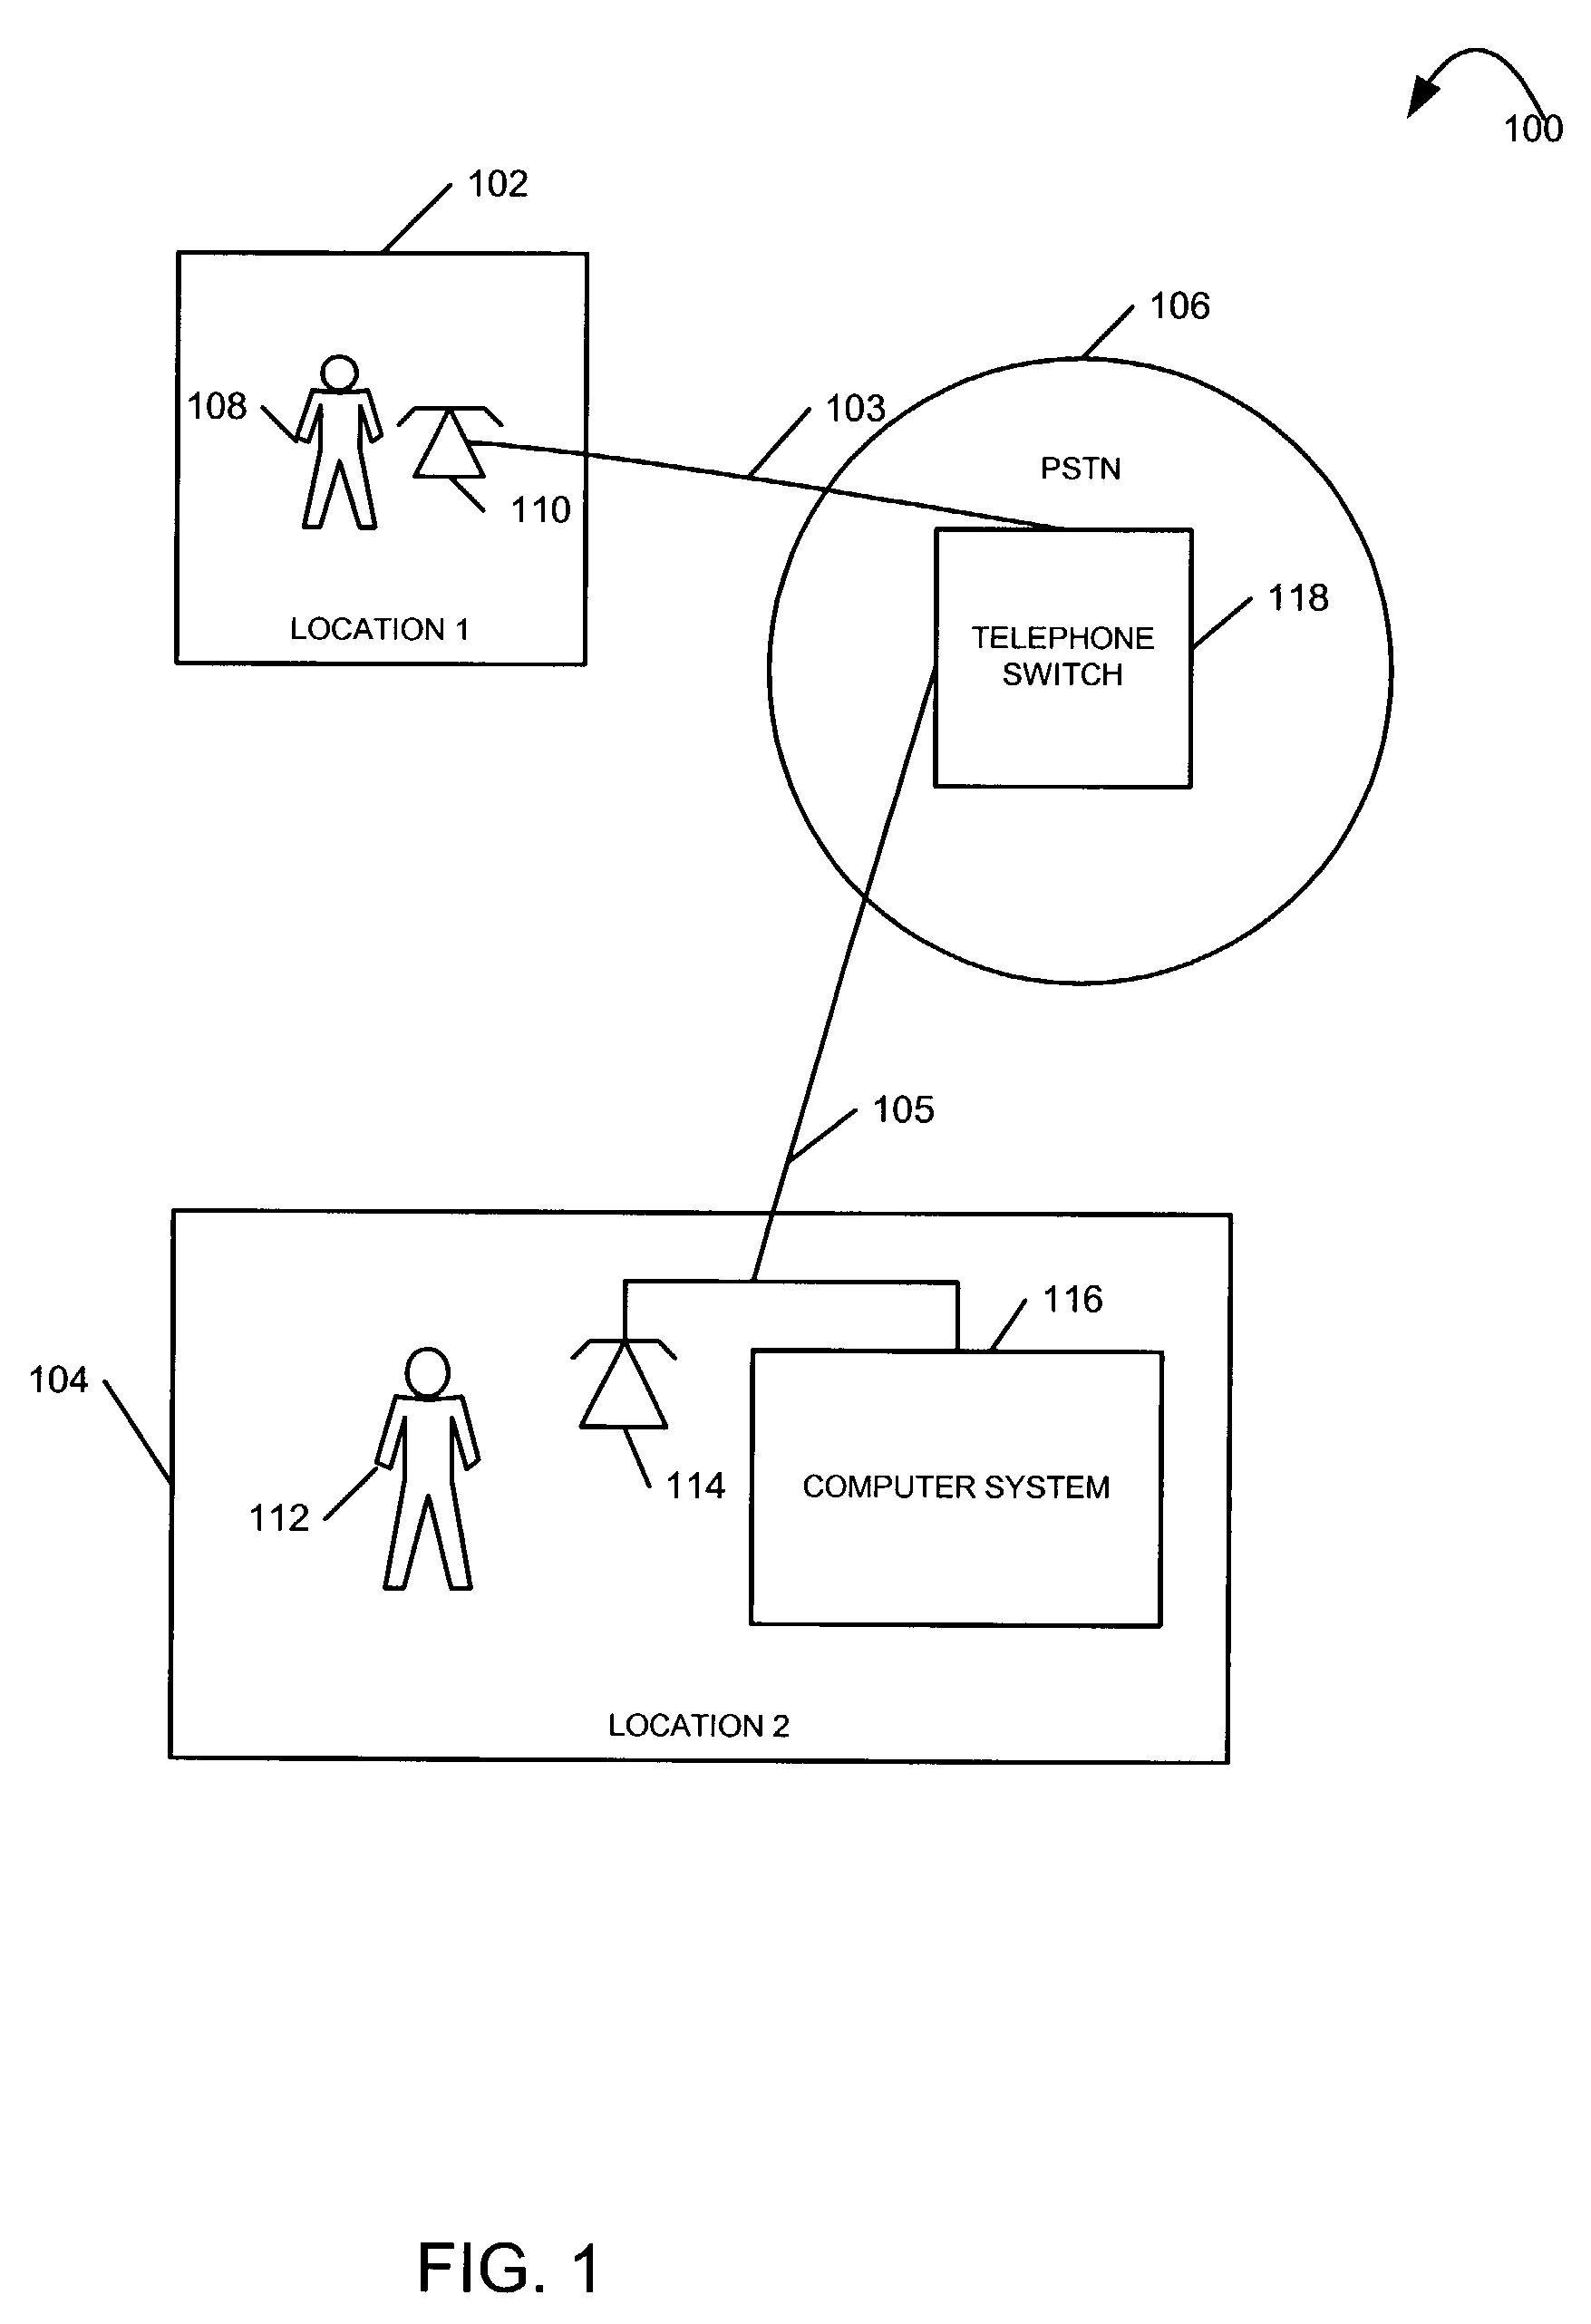 Methods and apparatus for controlling a user interface based on the emotional state of a user